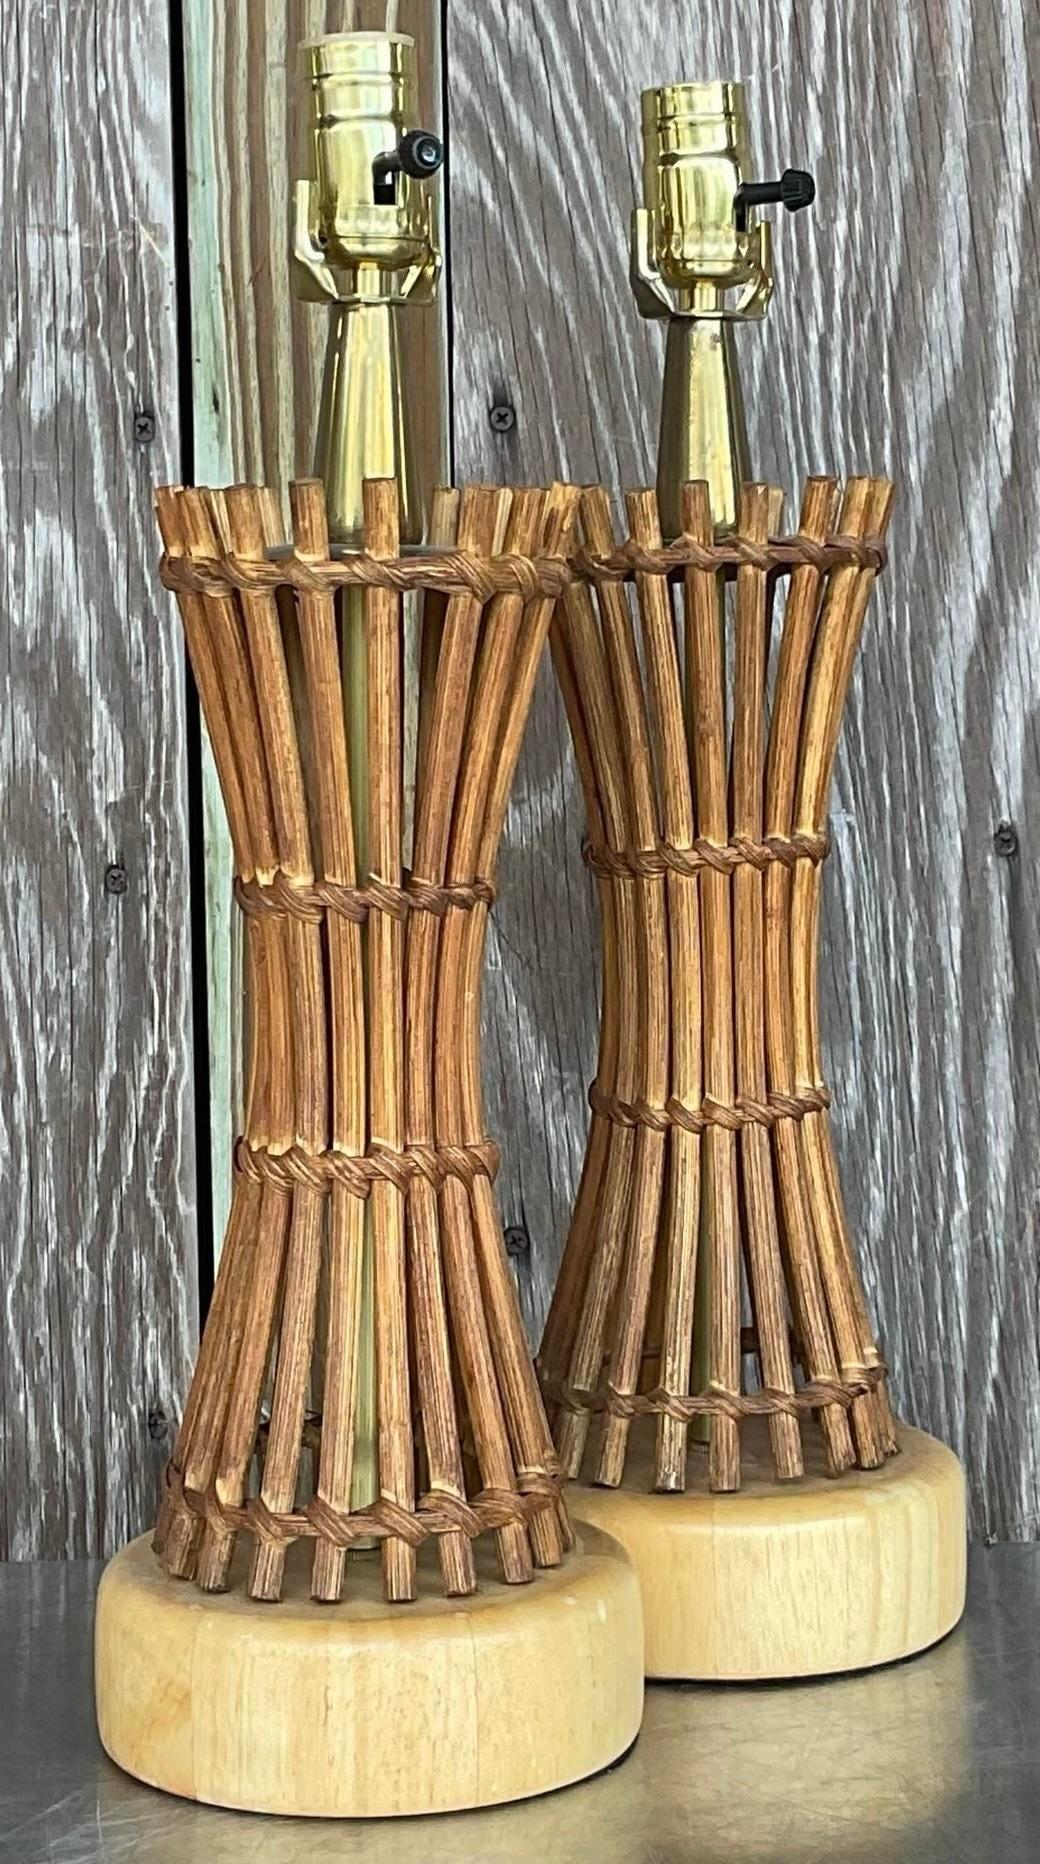 Bring coastal elegance to your home with this pair of vintage coastal pencil reed table lamps. Combining coastal vibes with American craftsmanship, these lamps feature intricate reed designs, adding natural warmth and charm to any space.